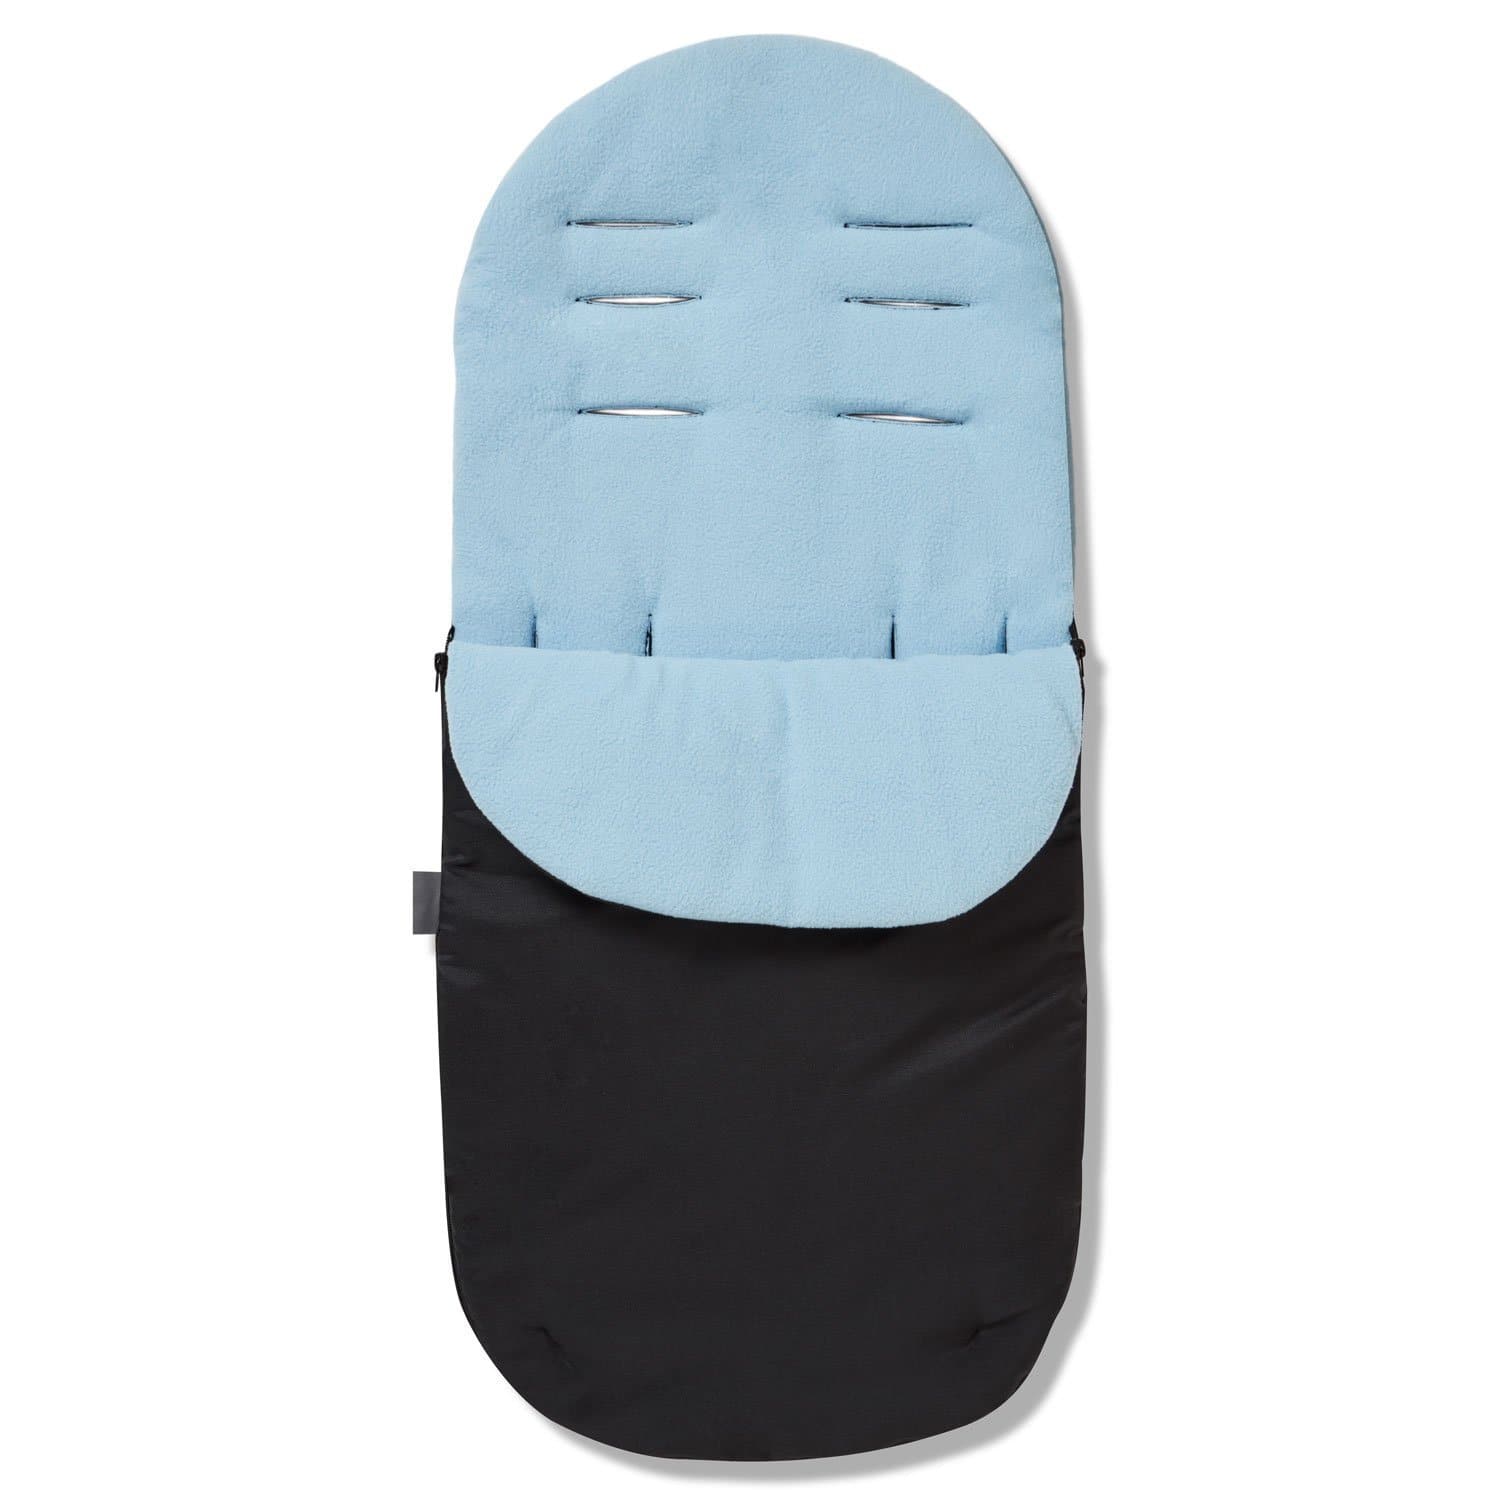 Footmuff / Cosy Toes Compatible with Venicci - For Your Little One